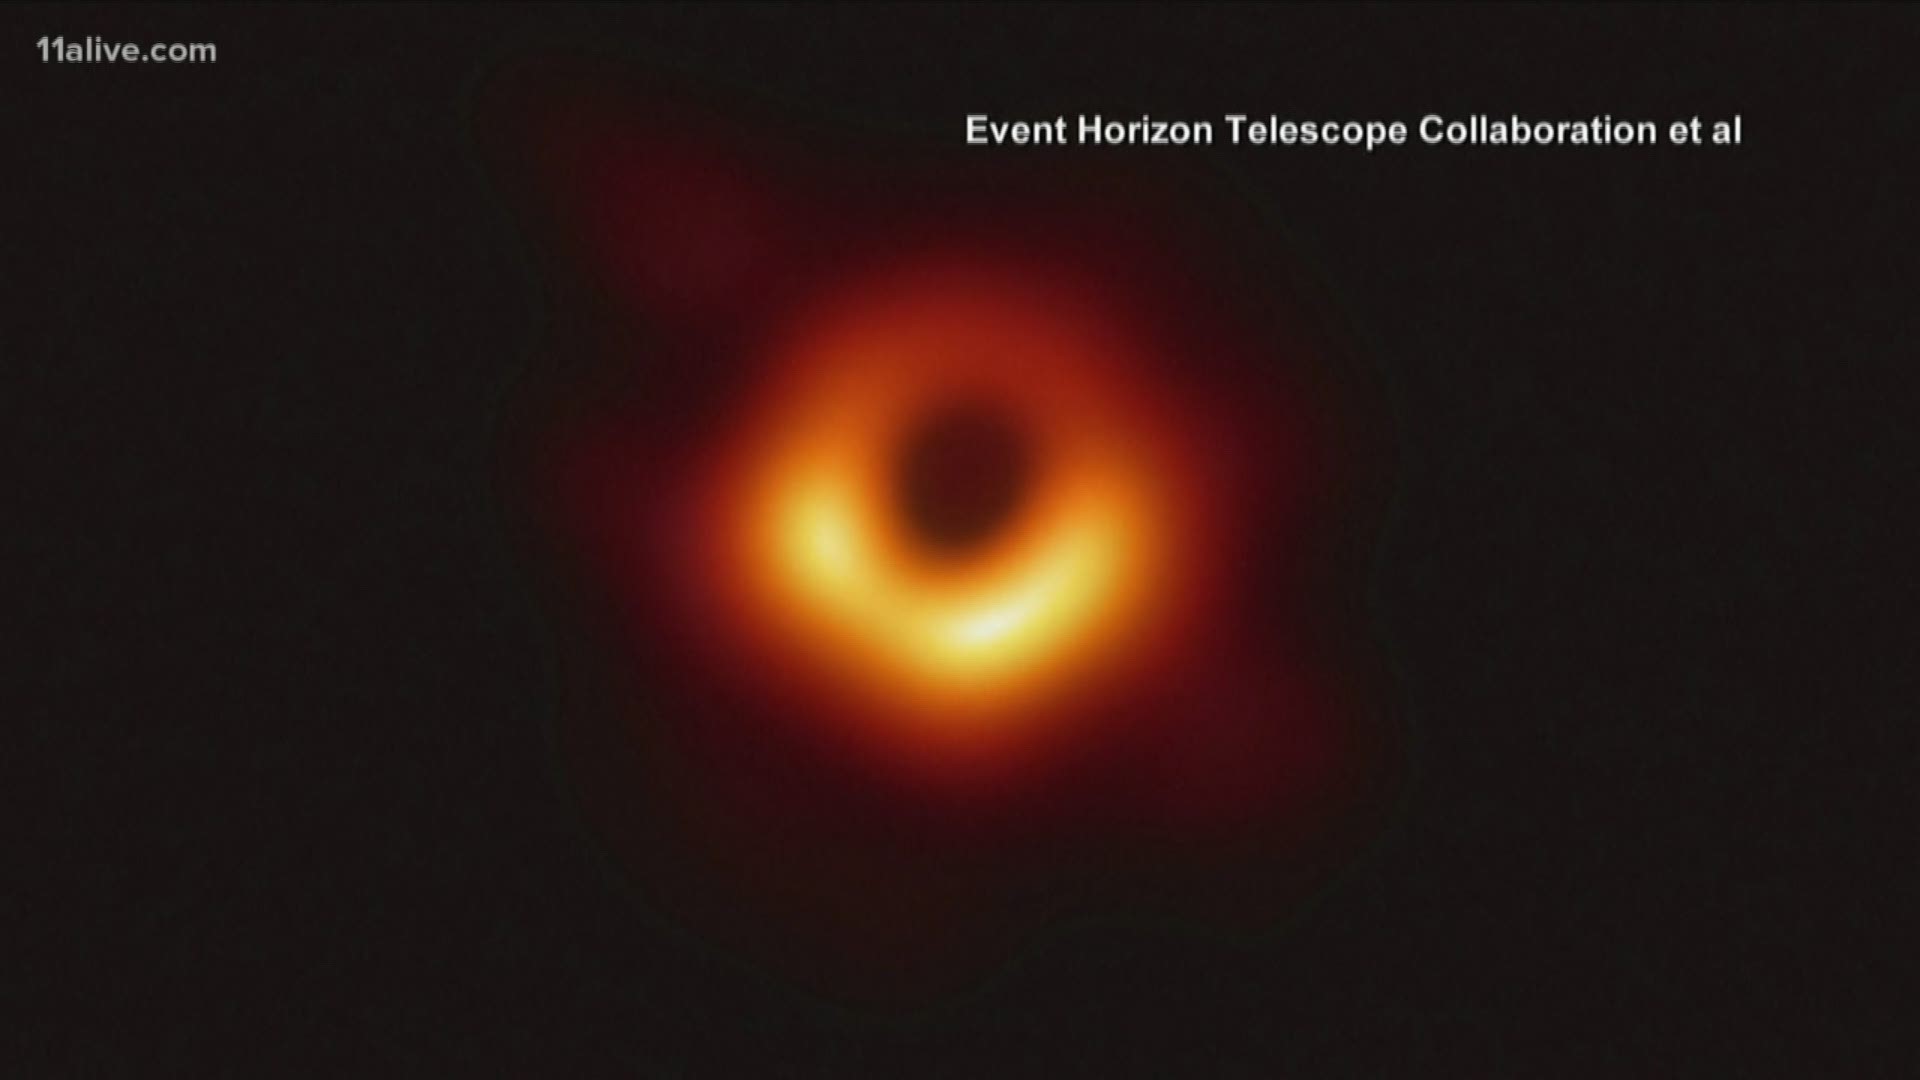 It took 28 million dollars, scientific innovation and more than a decade to capture the image.